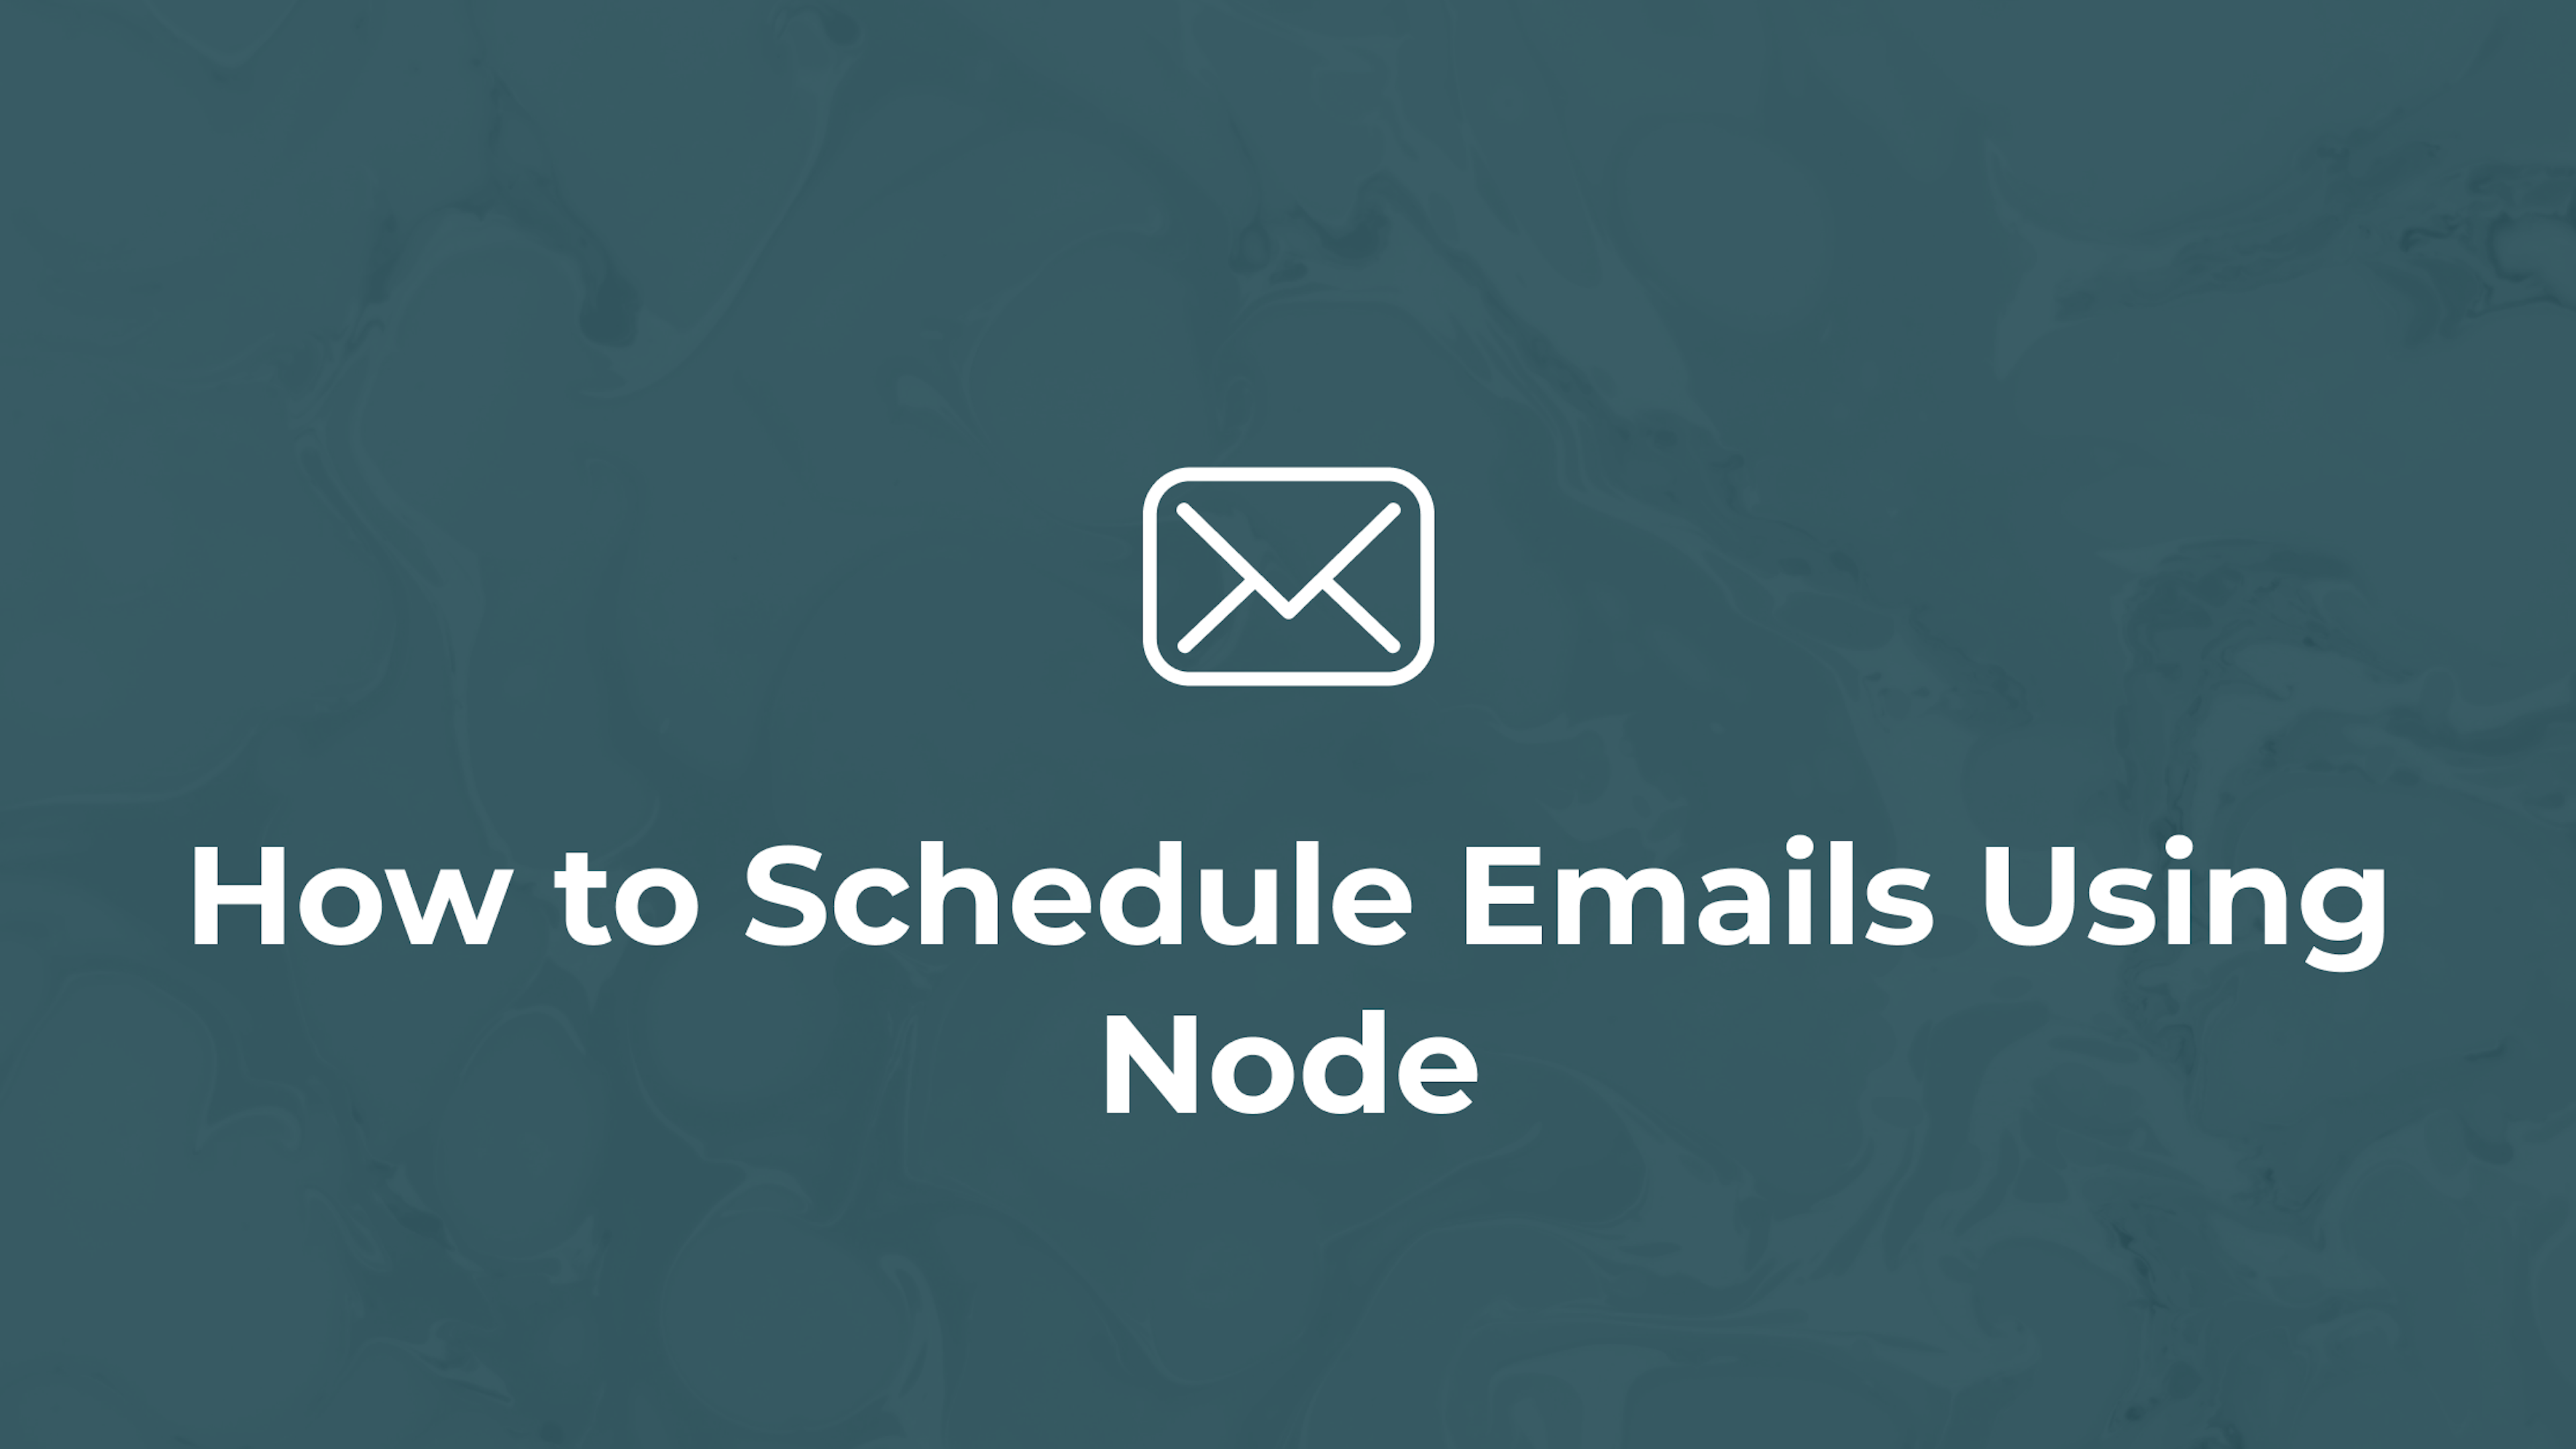 How to Schedule Emails Using Node